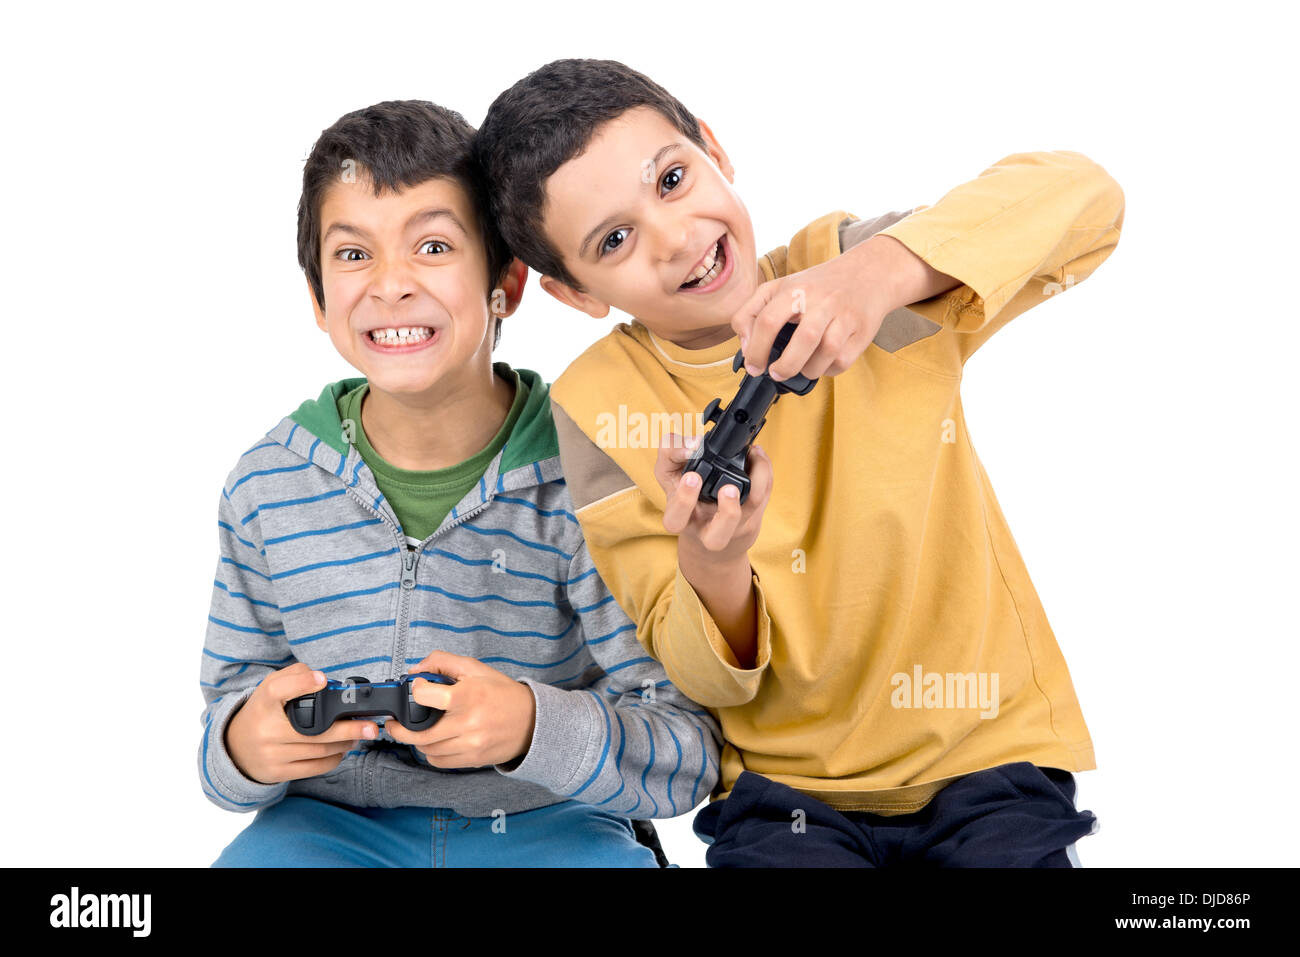 316 Kid Playing Video Game On White Stock Photos, High-Res Pictures, and  Images - Getty Images